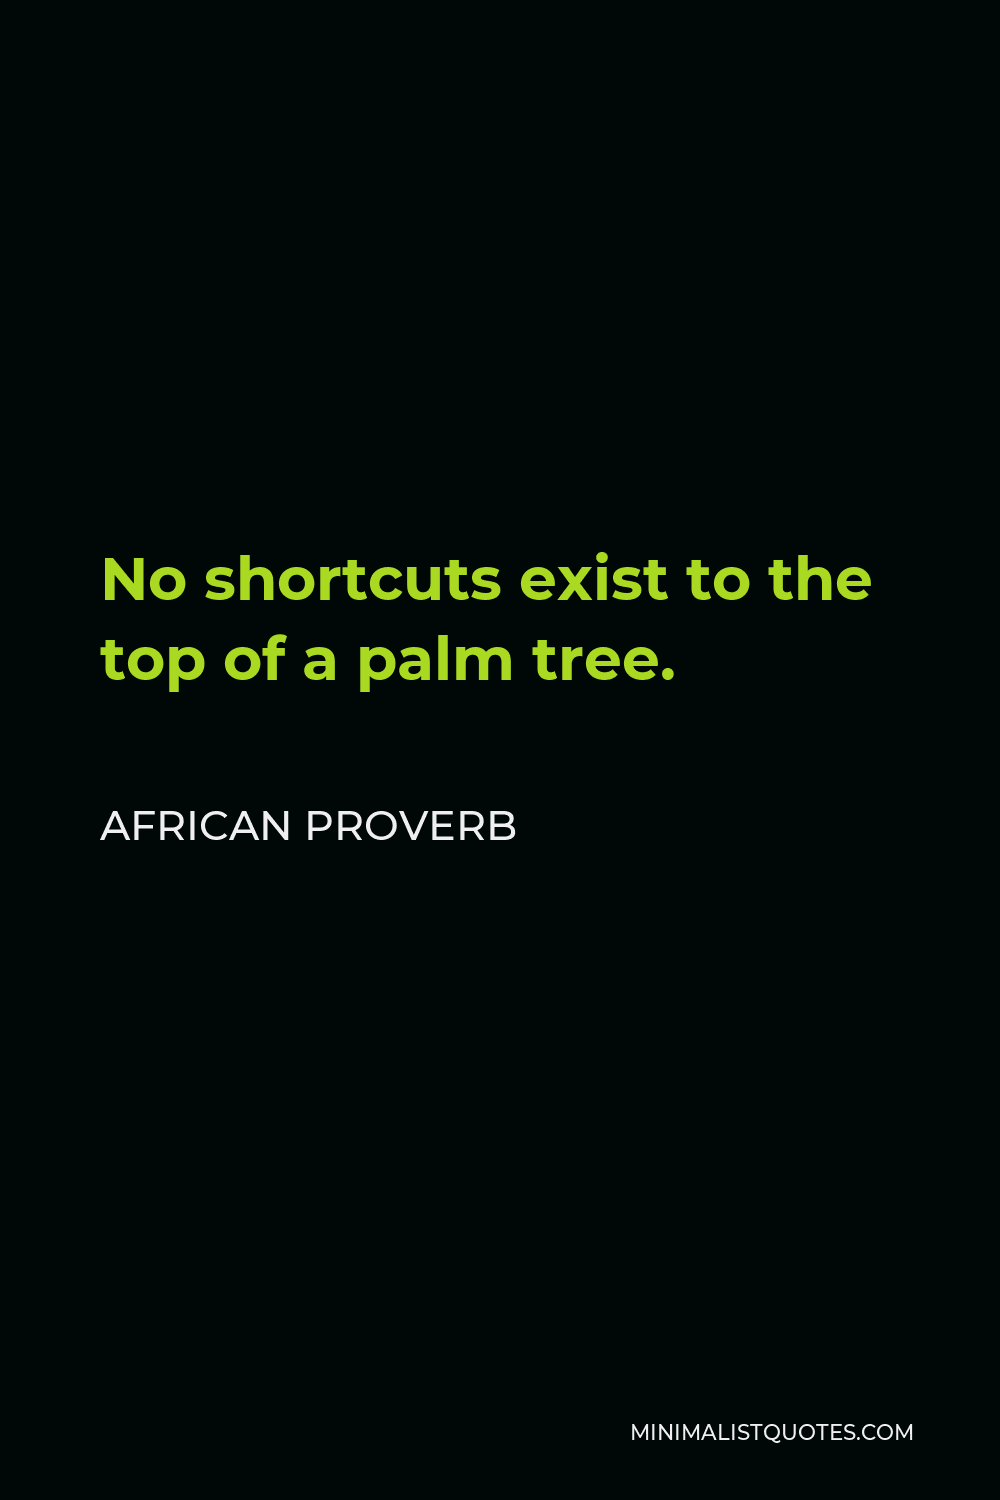 African Proverb Quote - No shortcuts exist to the top of a palm tree.